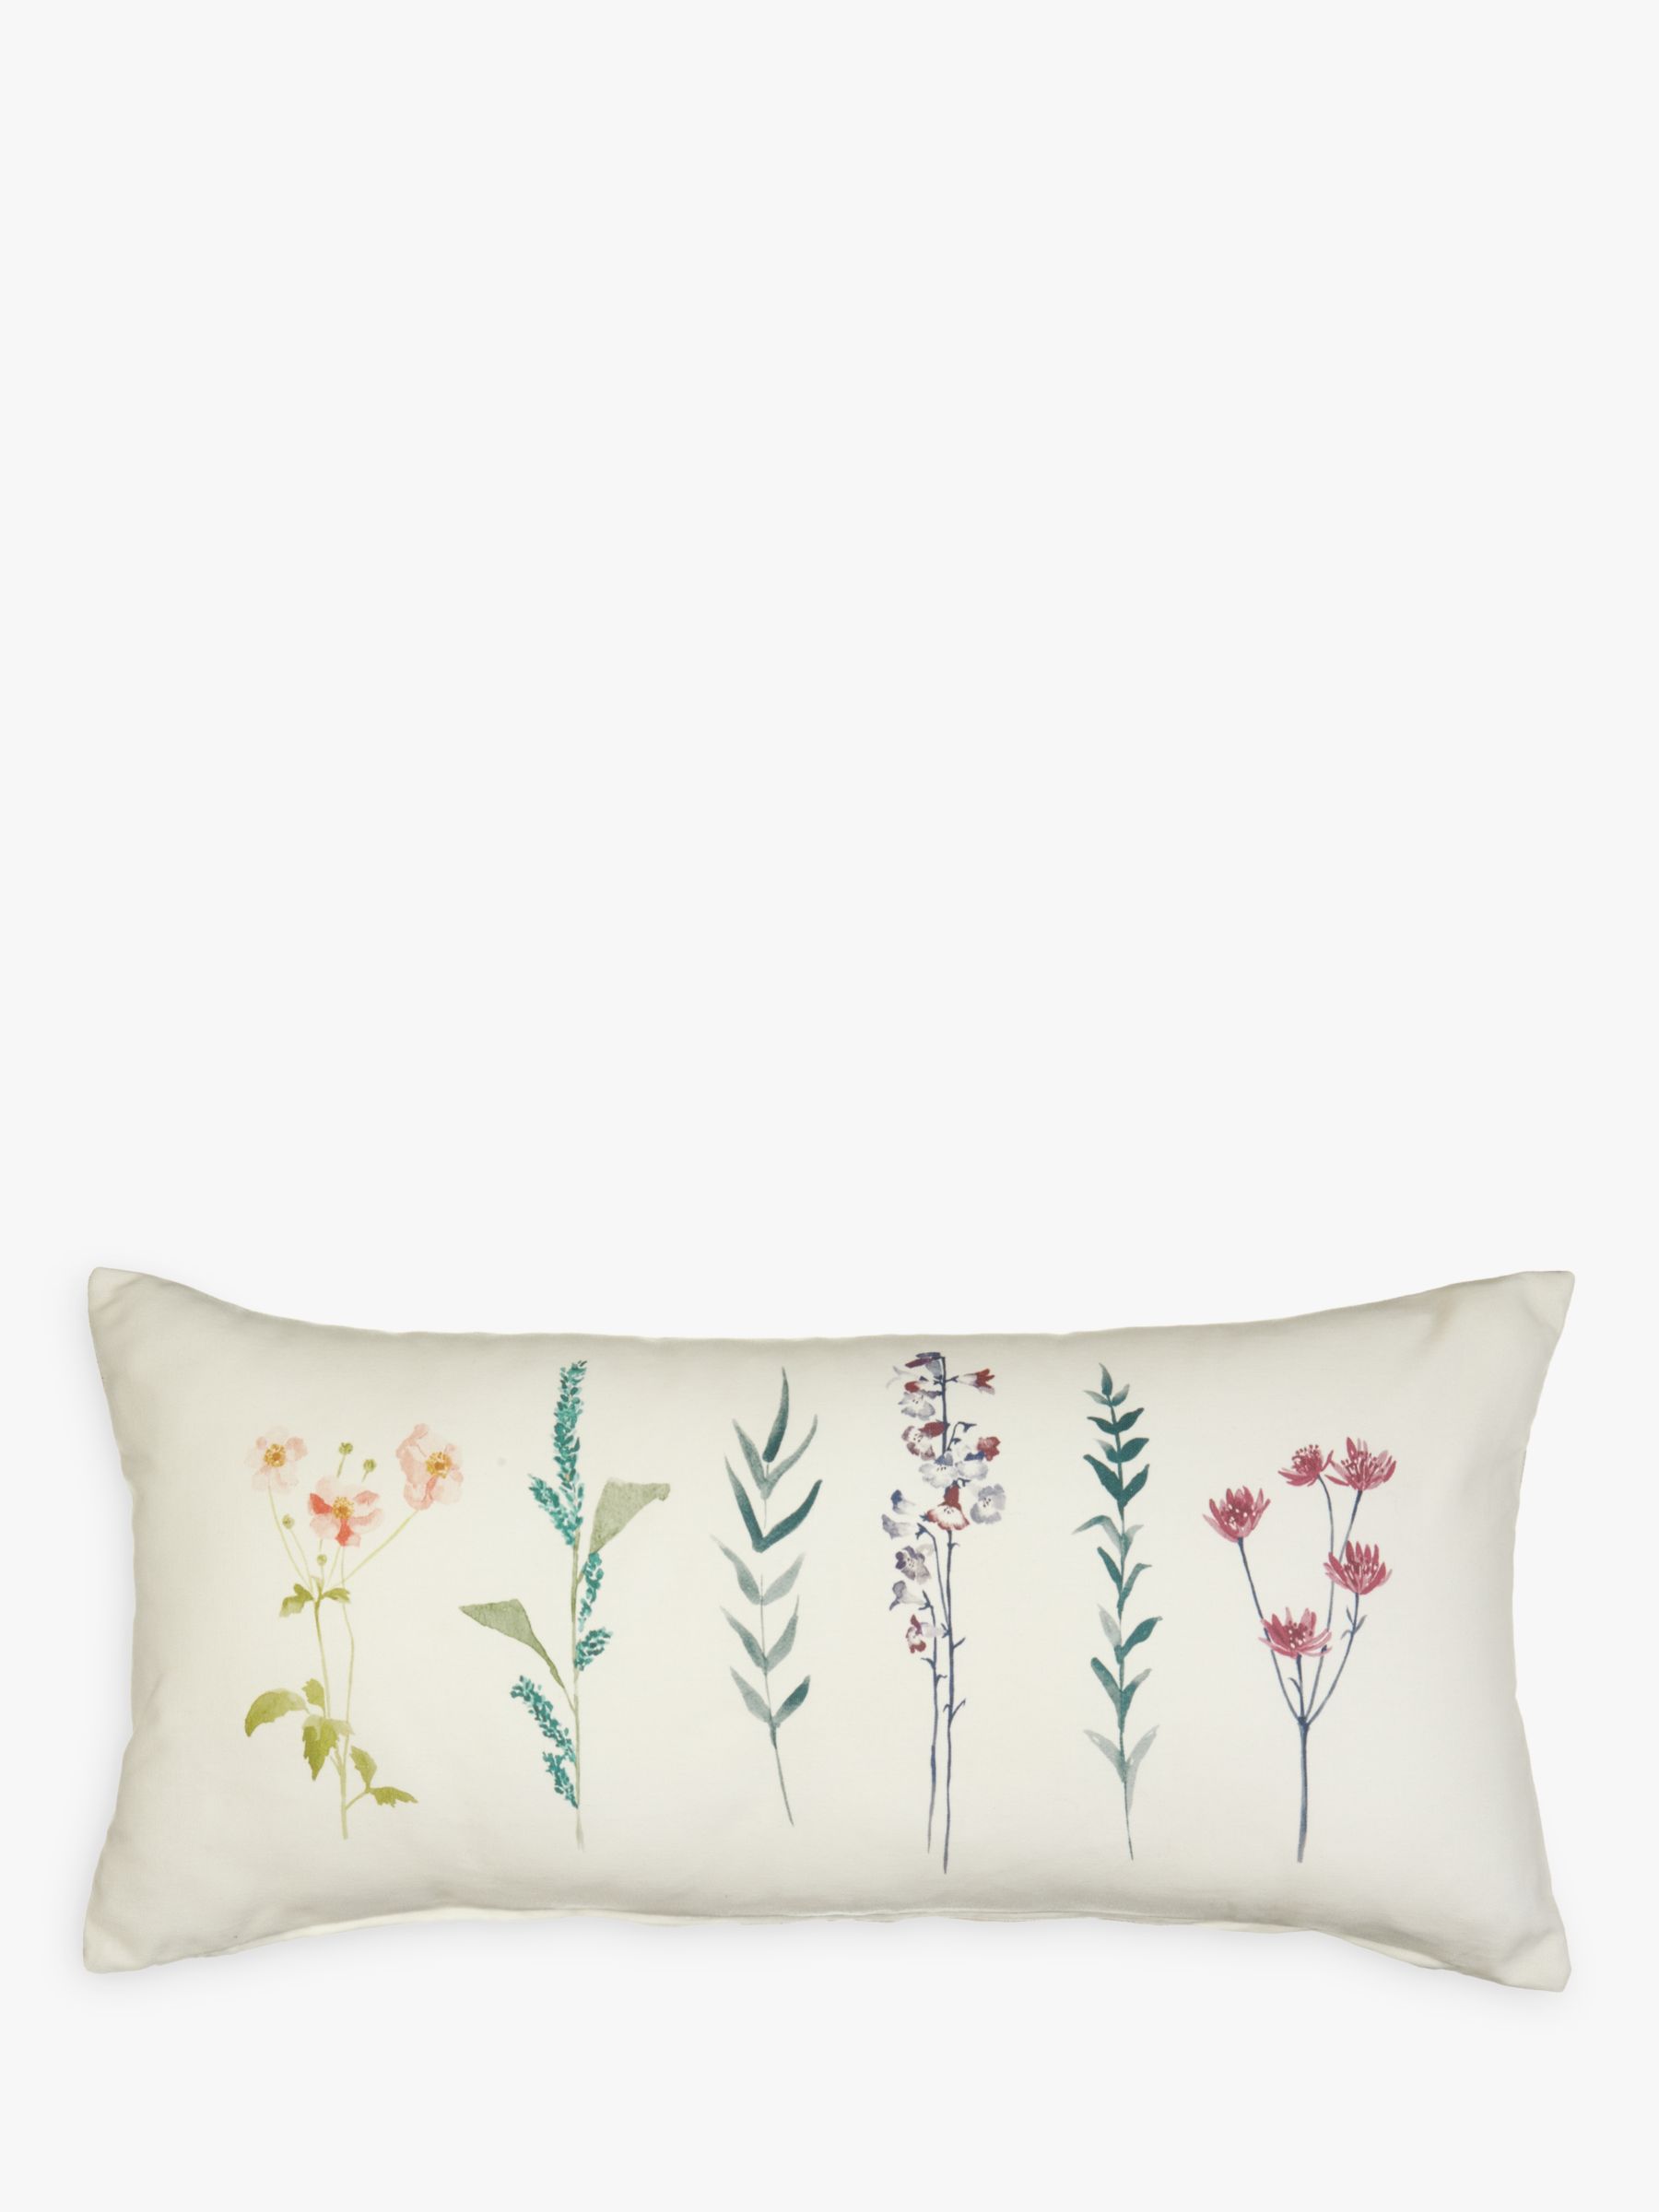 John Lewis & Partners Relaxed Country Longstock Cushion